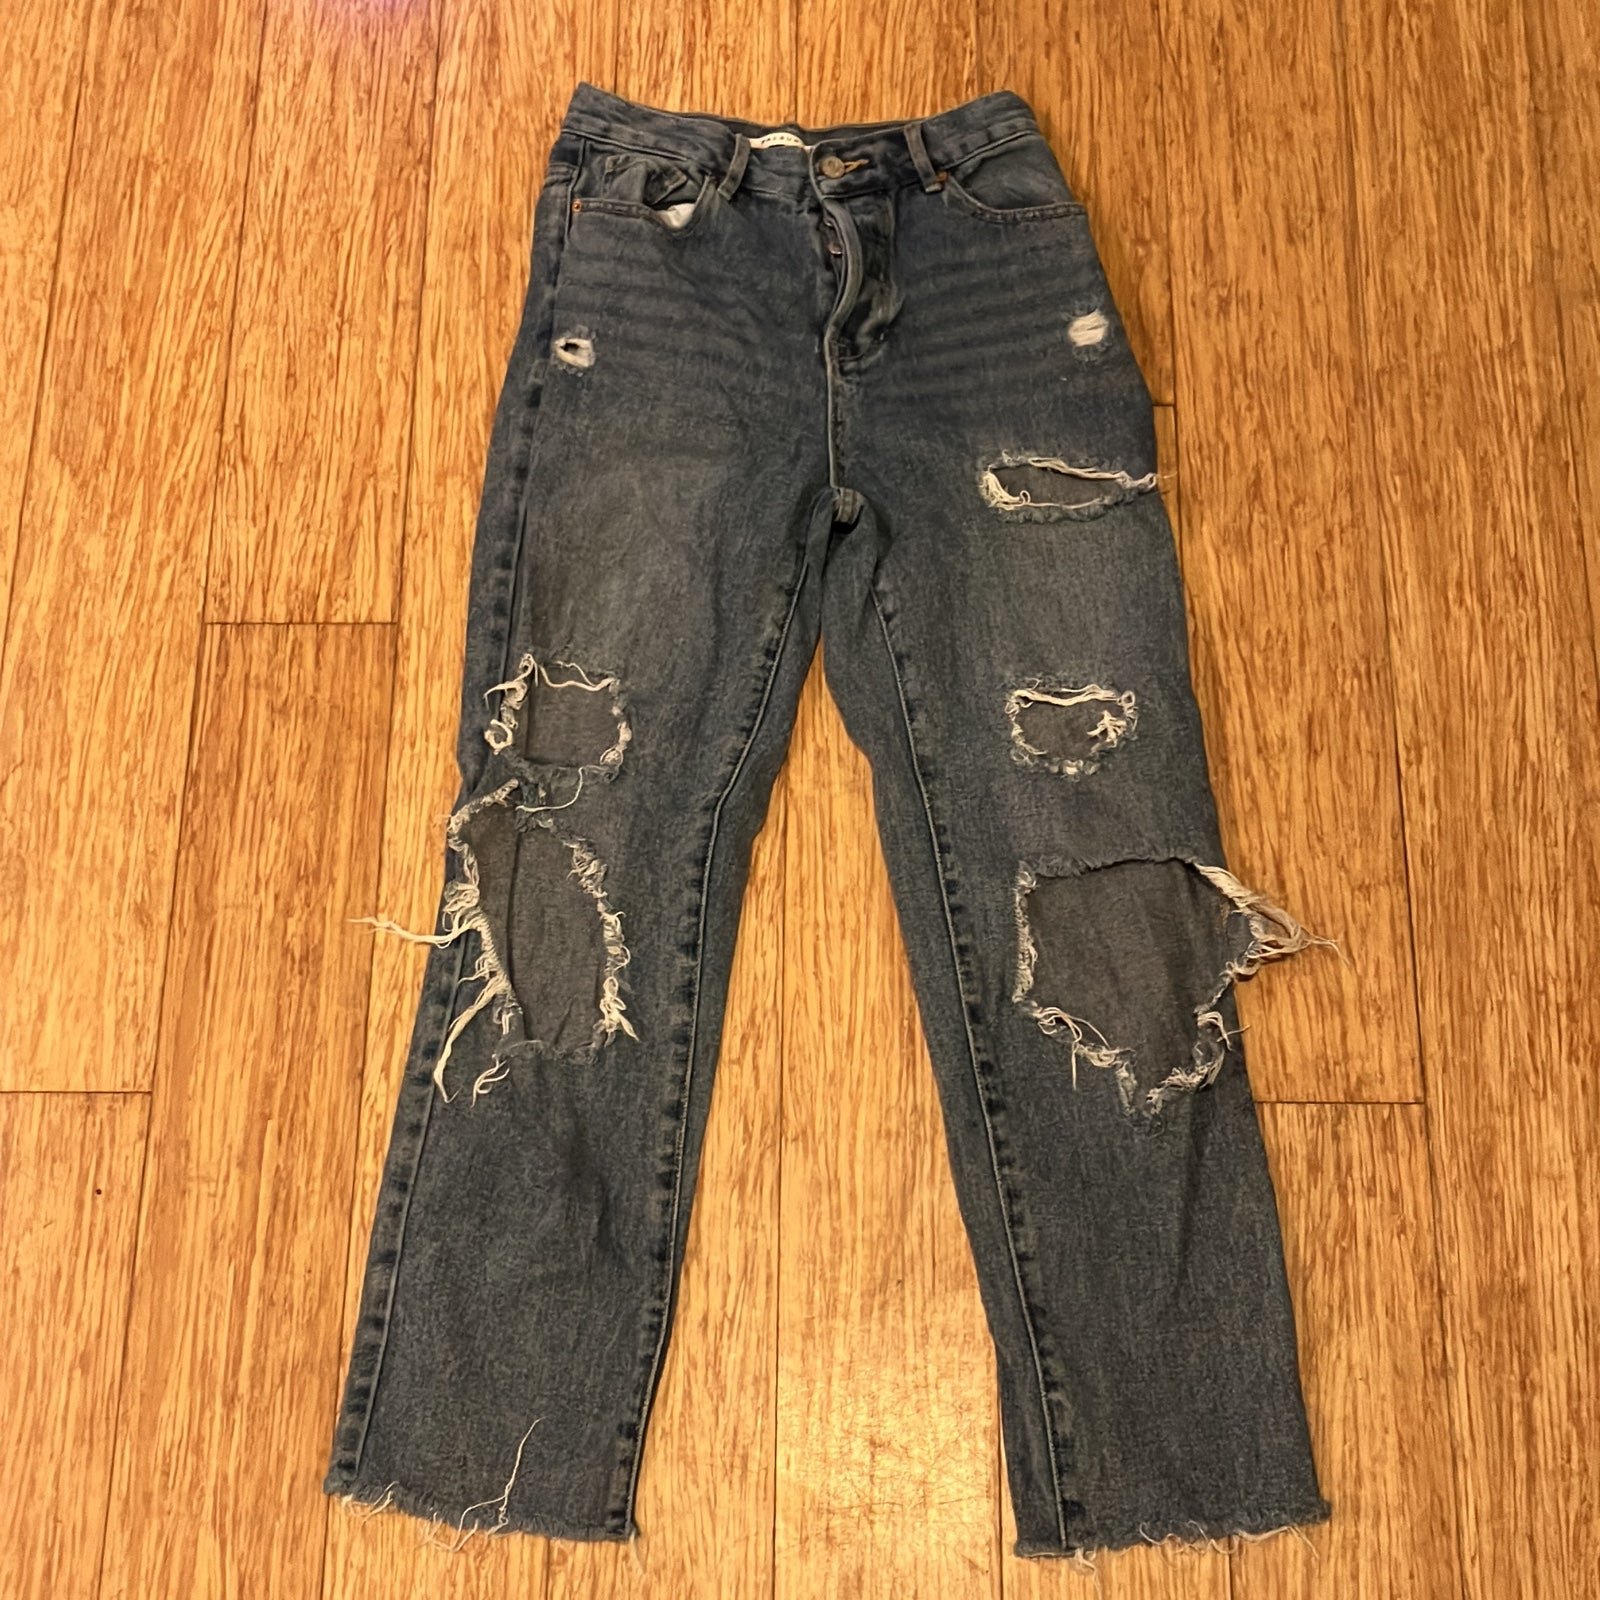 cheapest place to buy  jeans pGo4s8ElL Zero Profit 